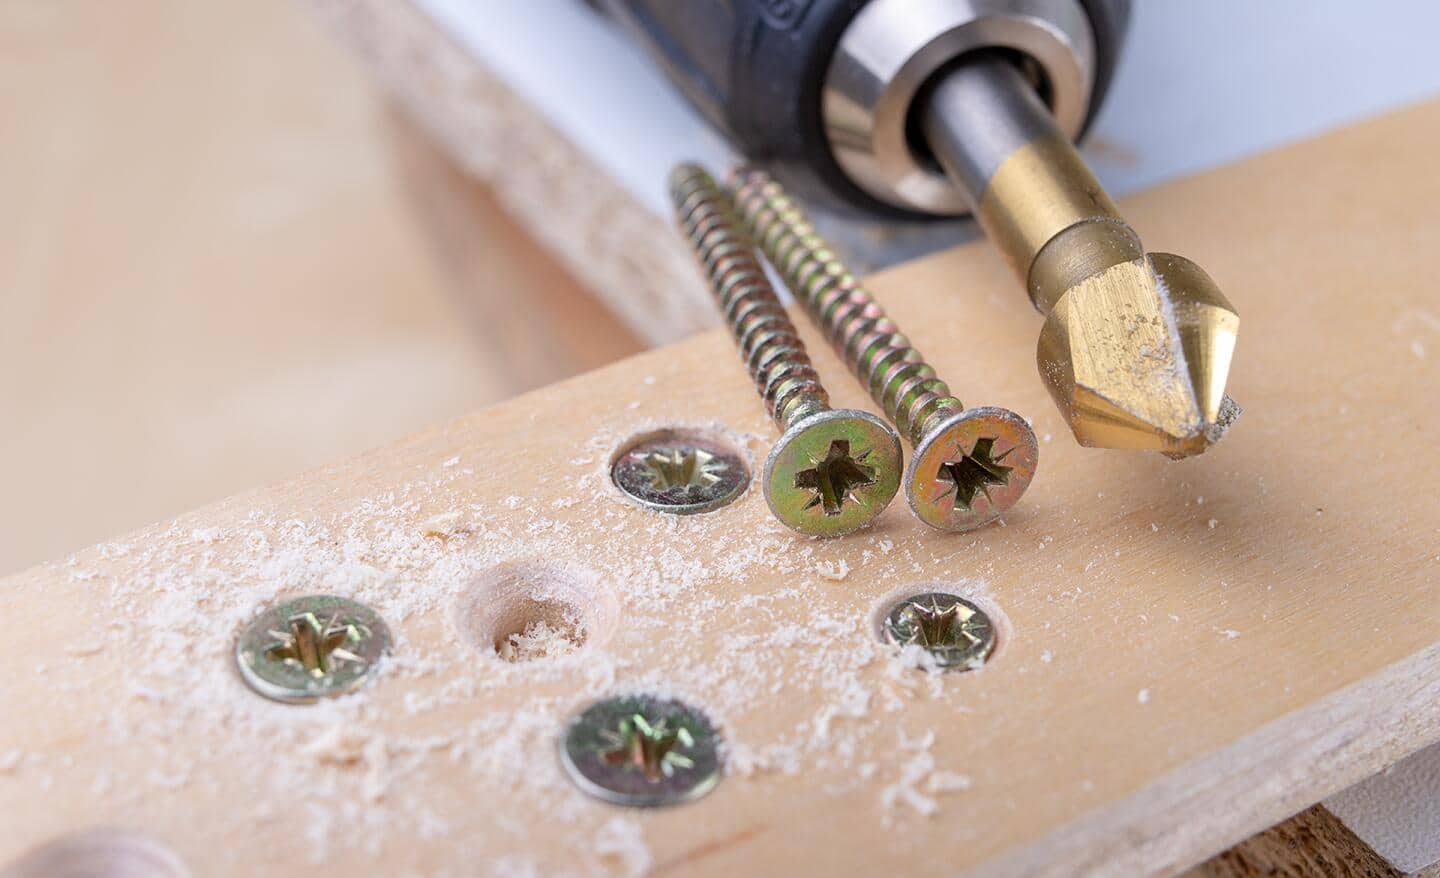 A drill and screws on a piece of wood.